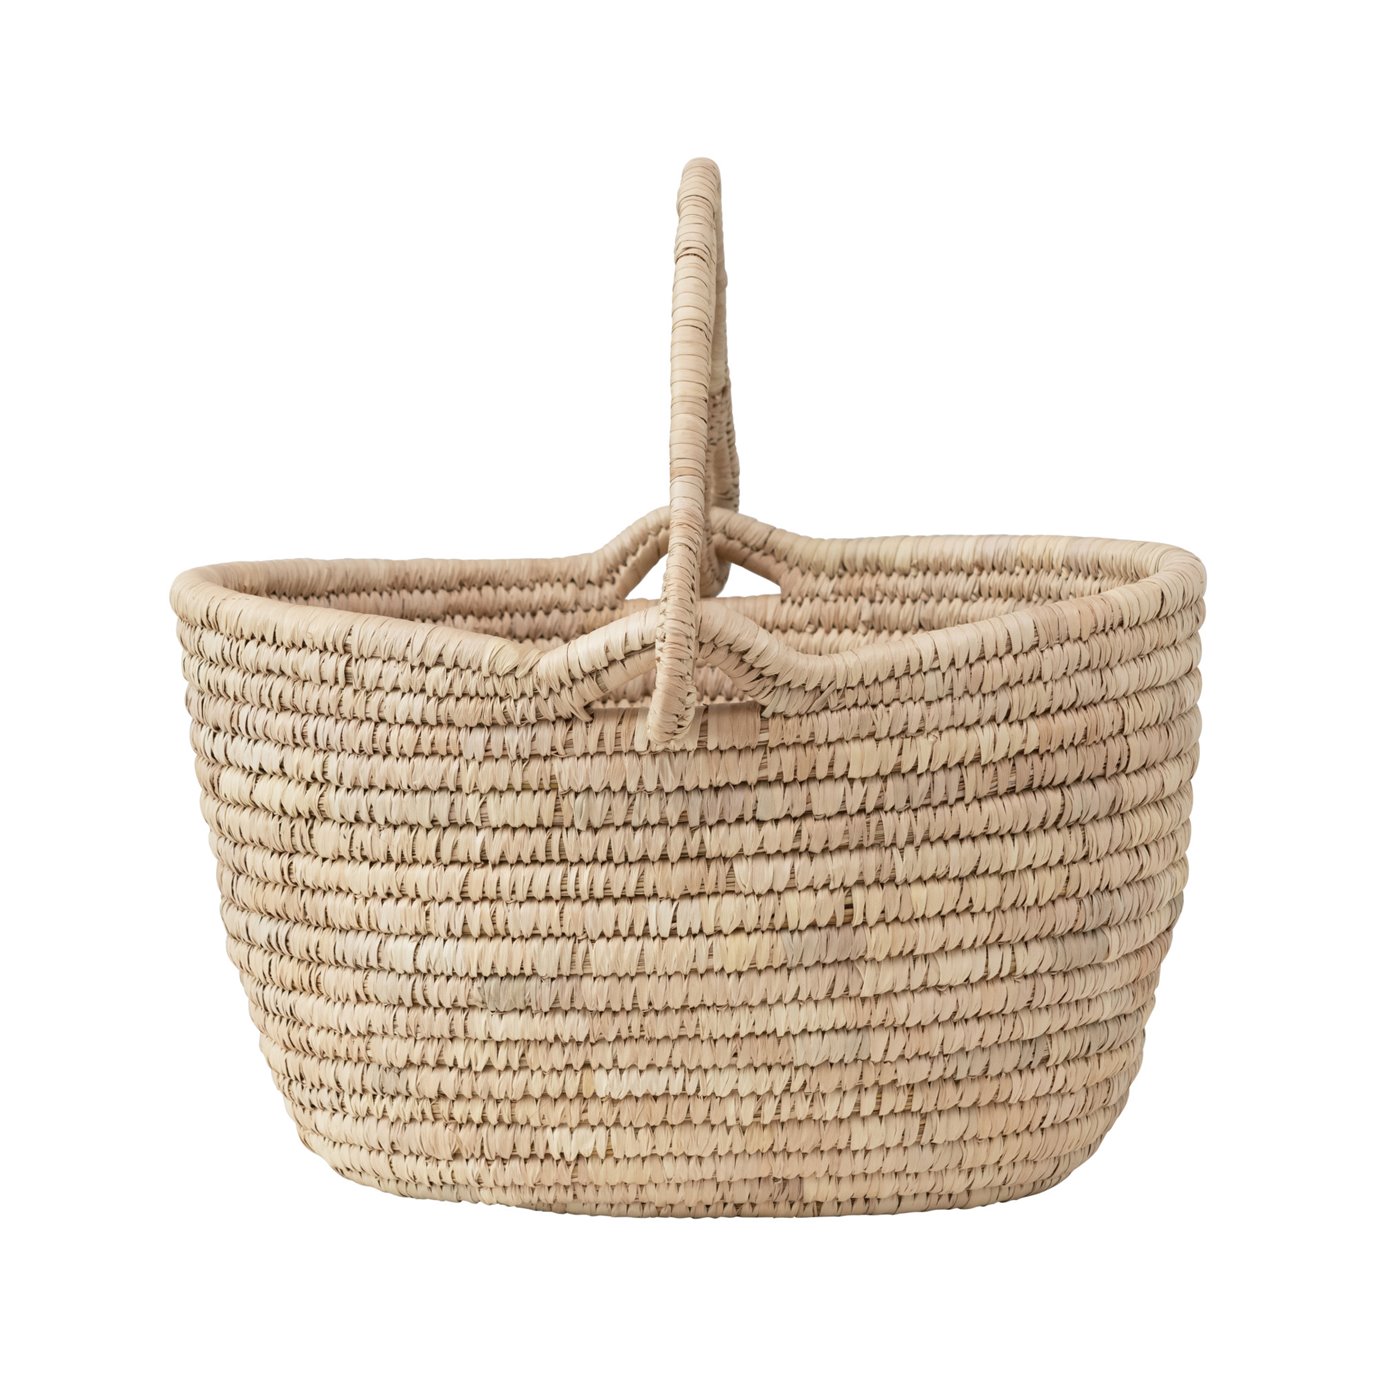 Hand-Woven Grass and Date Leaf Basket with Handle